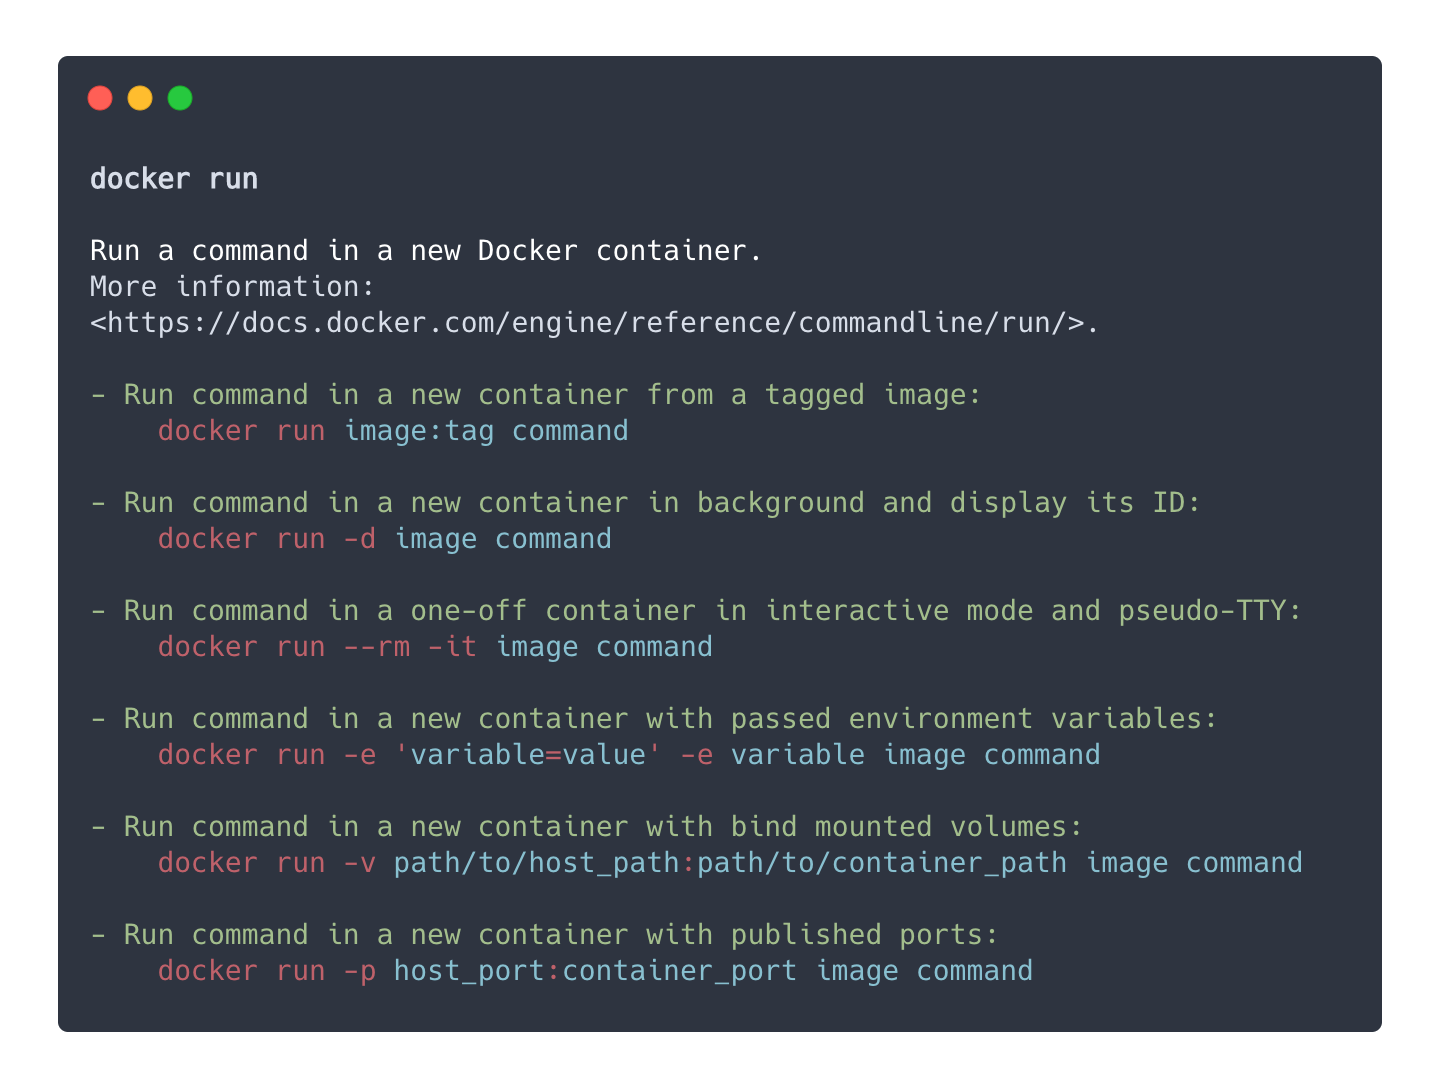 More tldr output, this time for "docker run". For example, "Run command in a new container from a tagged image:" is followed by the command "docker run image:tag command".